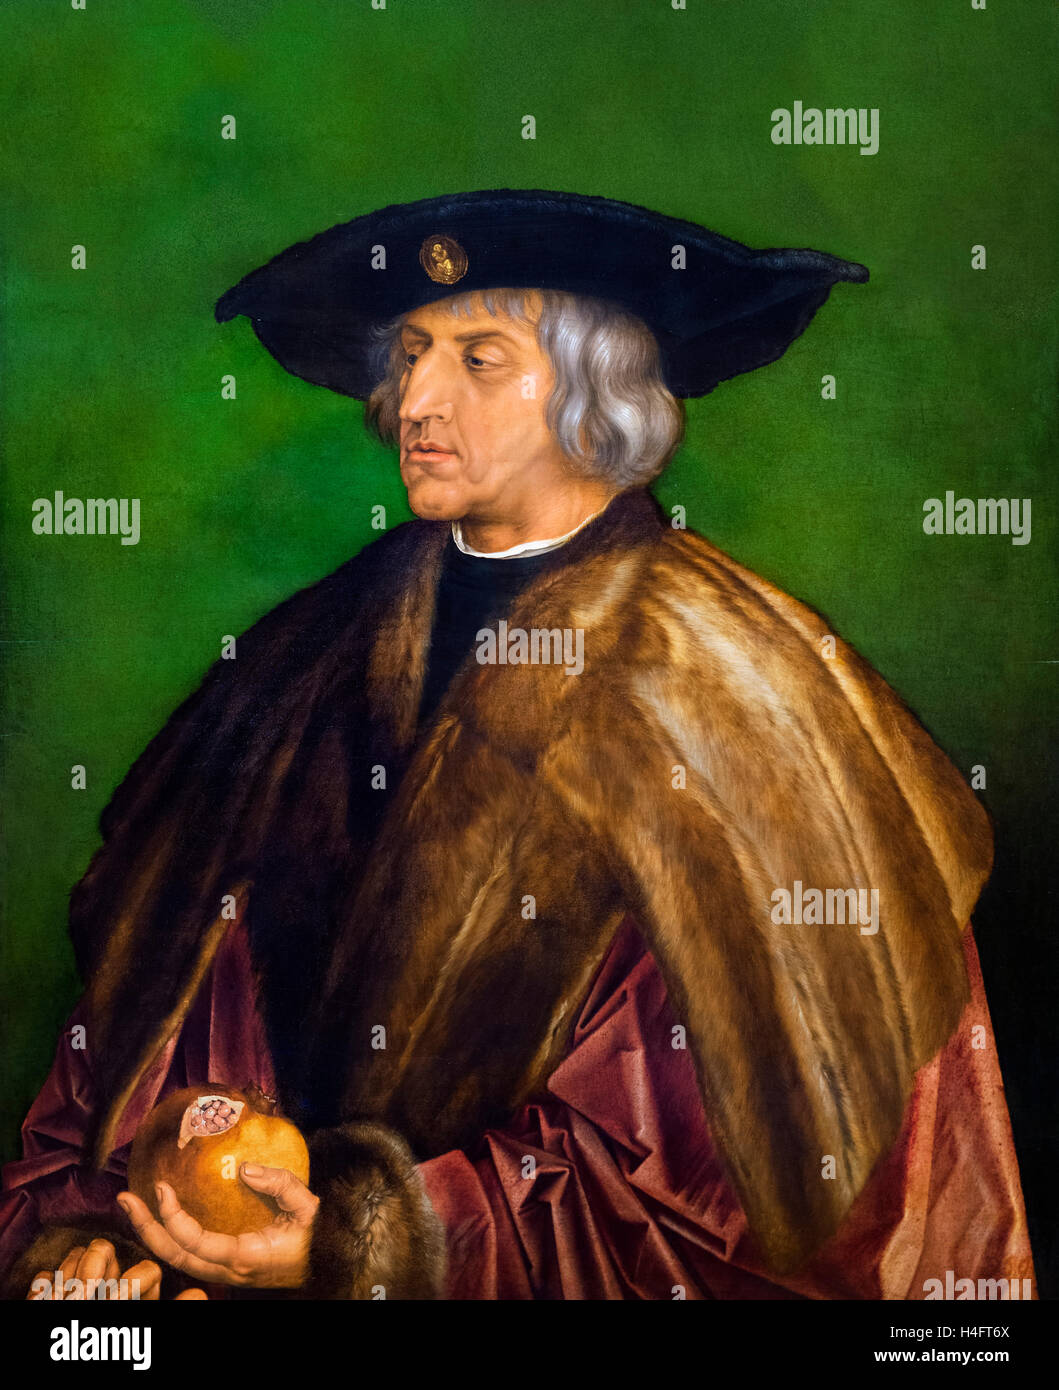 Maximilian I (1459-1519), King of the Romans (also known as King of the Germans) from 1486 and Holy Roman Emperor from 1493 until his death. Portrait by Albrecht Dürer, oil on wood, 1519. Stock Photo